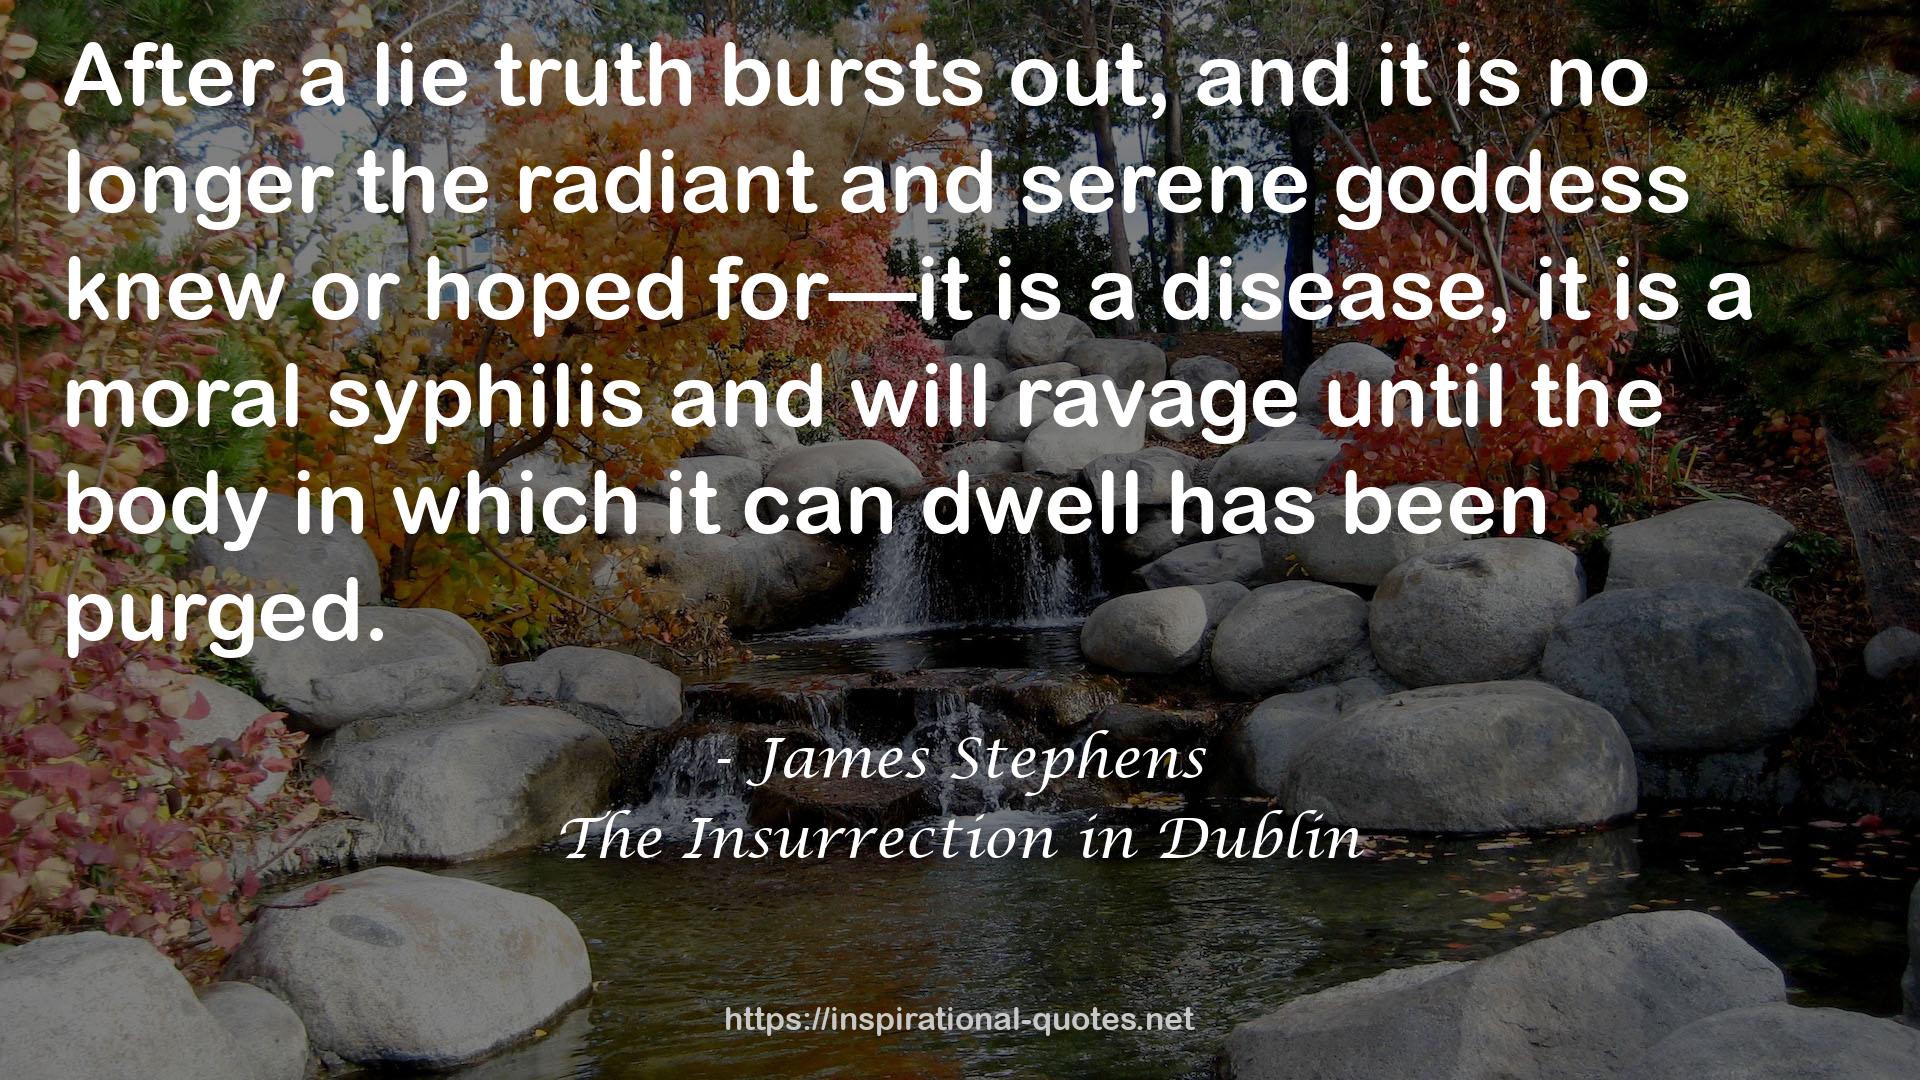 The Insurrection in Dublin QUOTES